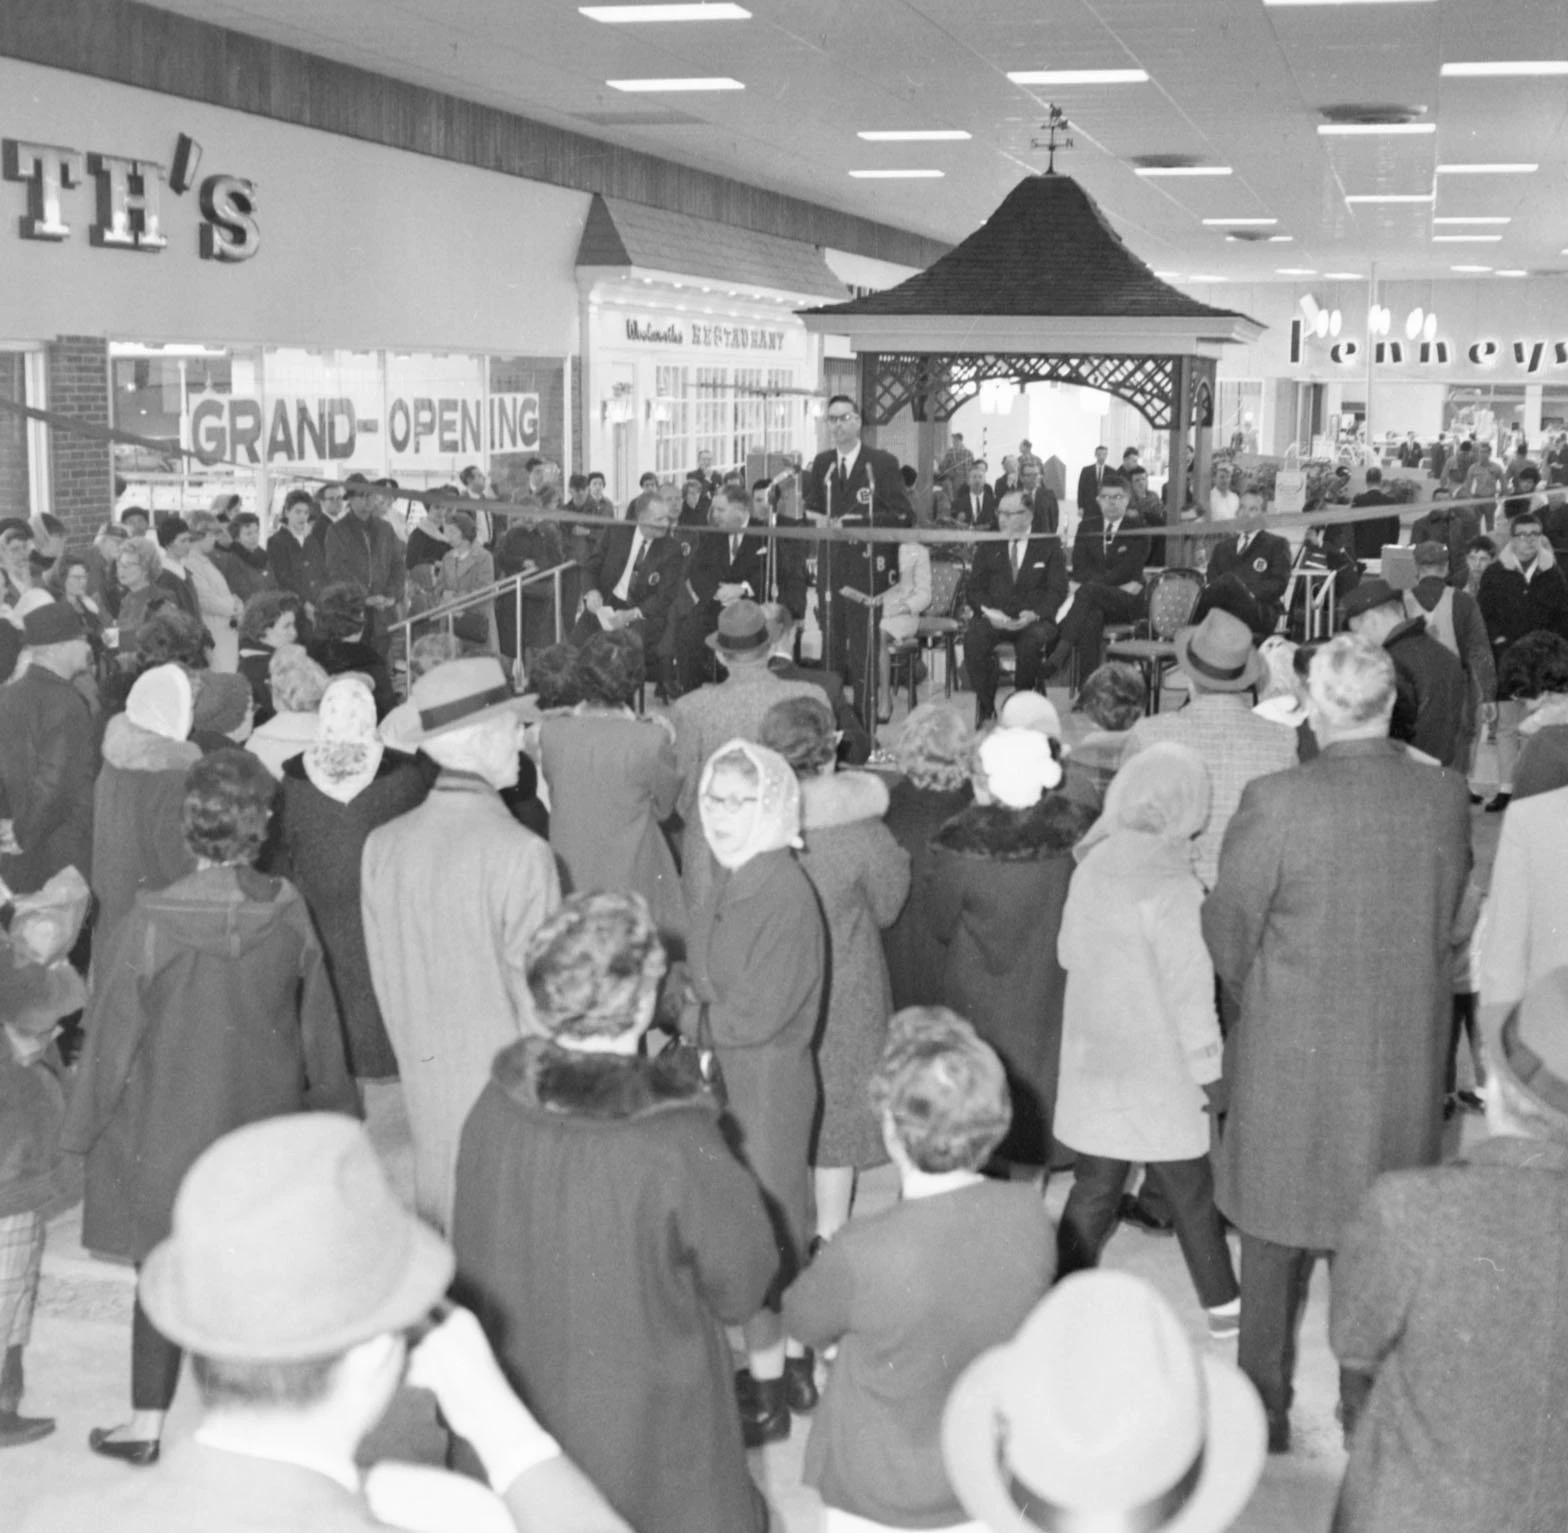 A large group of people, mostly dressed in coats and hats, are inside the mall. In the middle of the crowd is a light-skinned man wearing a suit speaking into a microphone. There is a small gazebo-like structure behind him. To the left is Woolworth's, with a sign in the window that says 